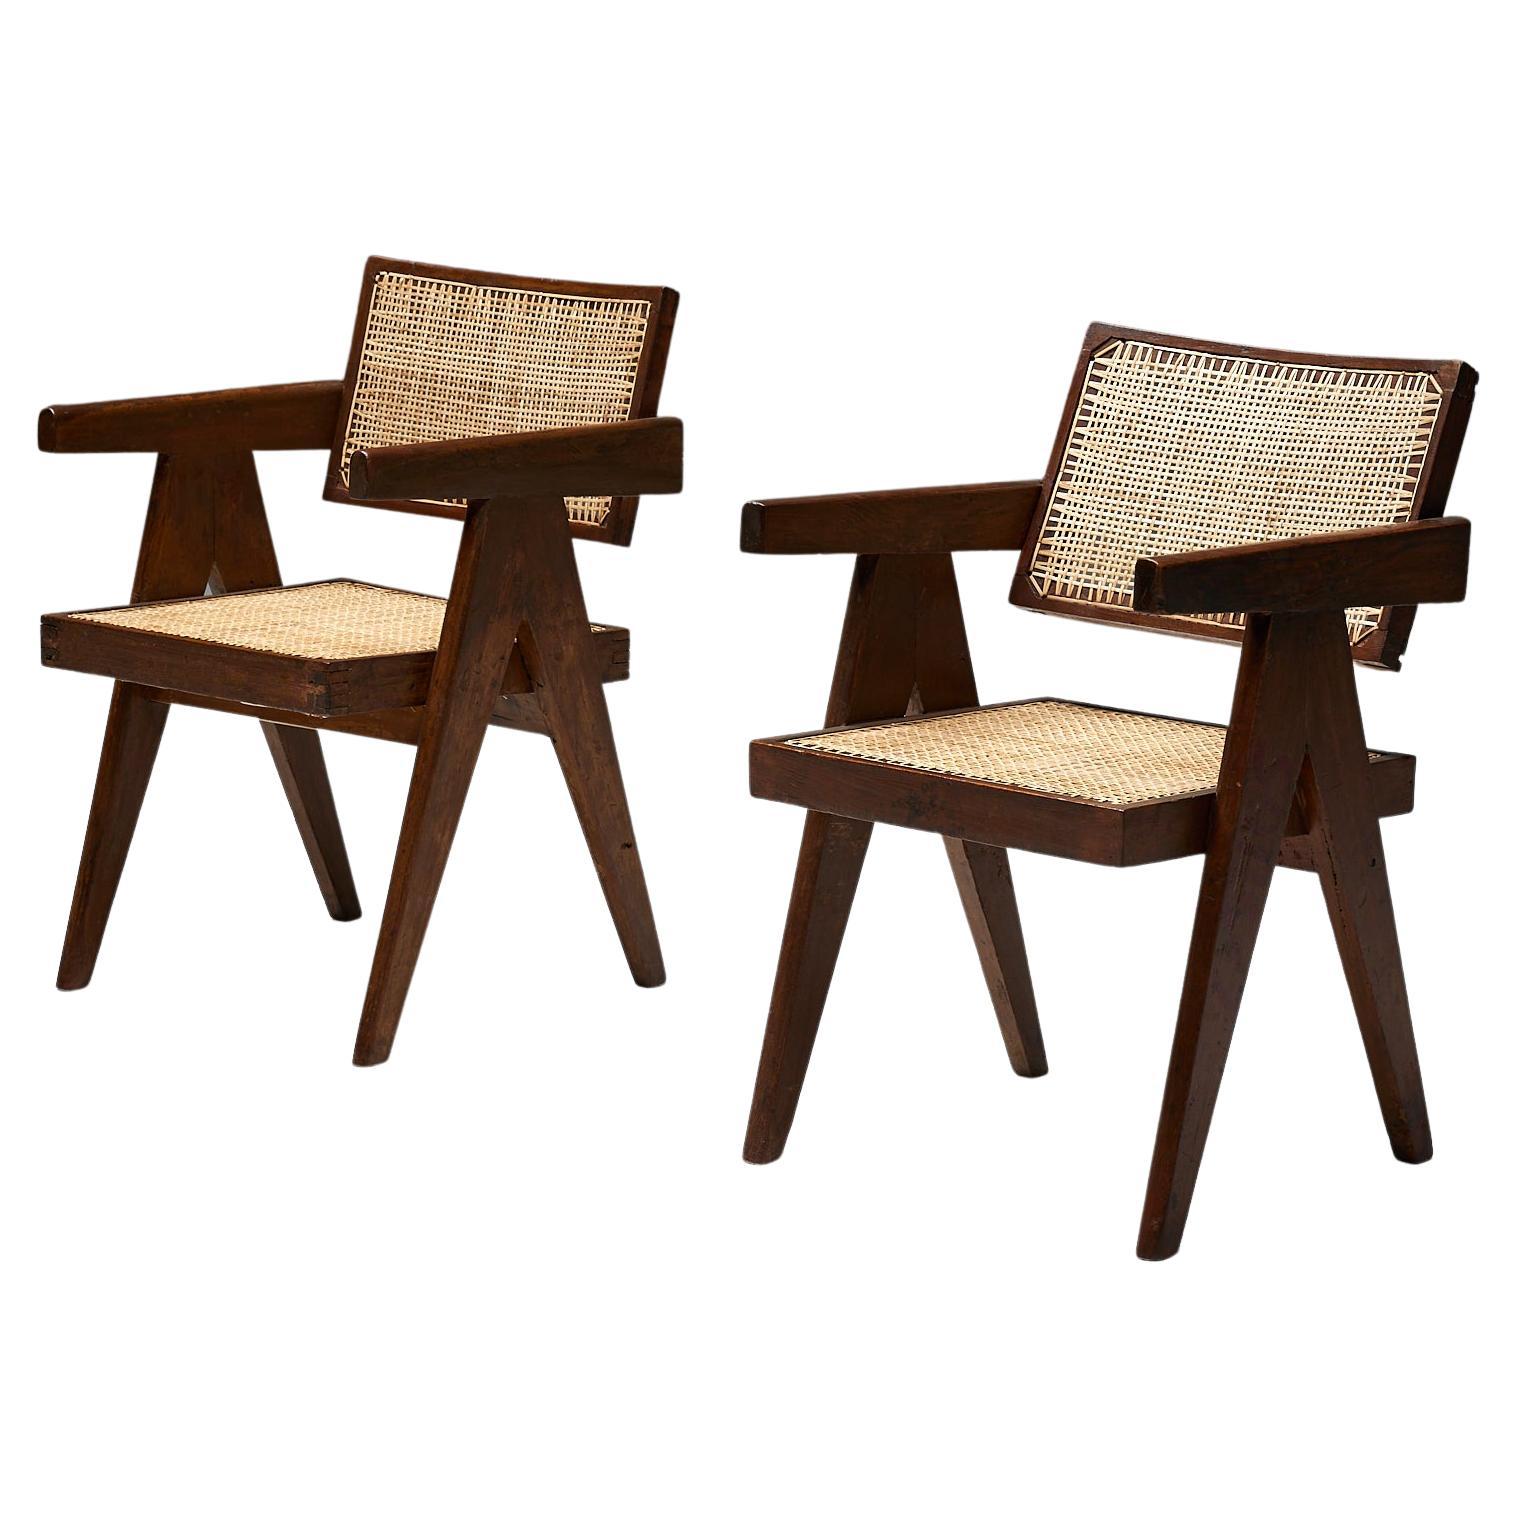 Office Cane Chairs by Pierre Jeanneret, India, 1955 For Sale